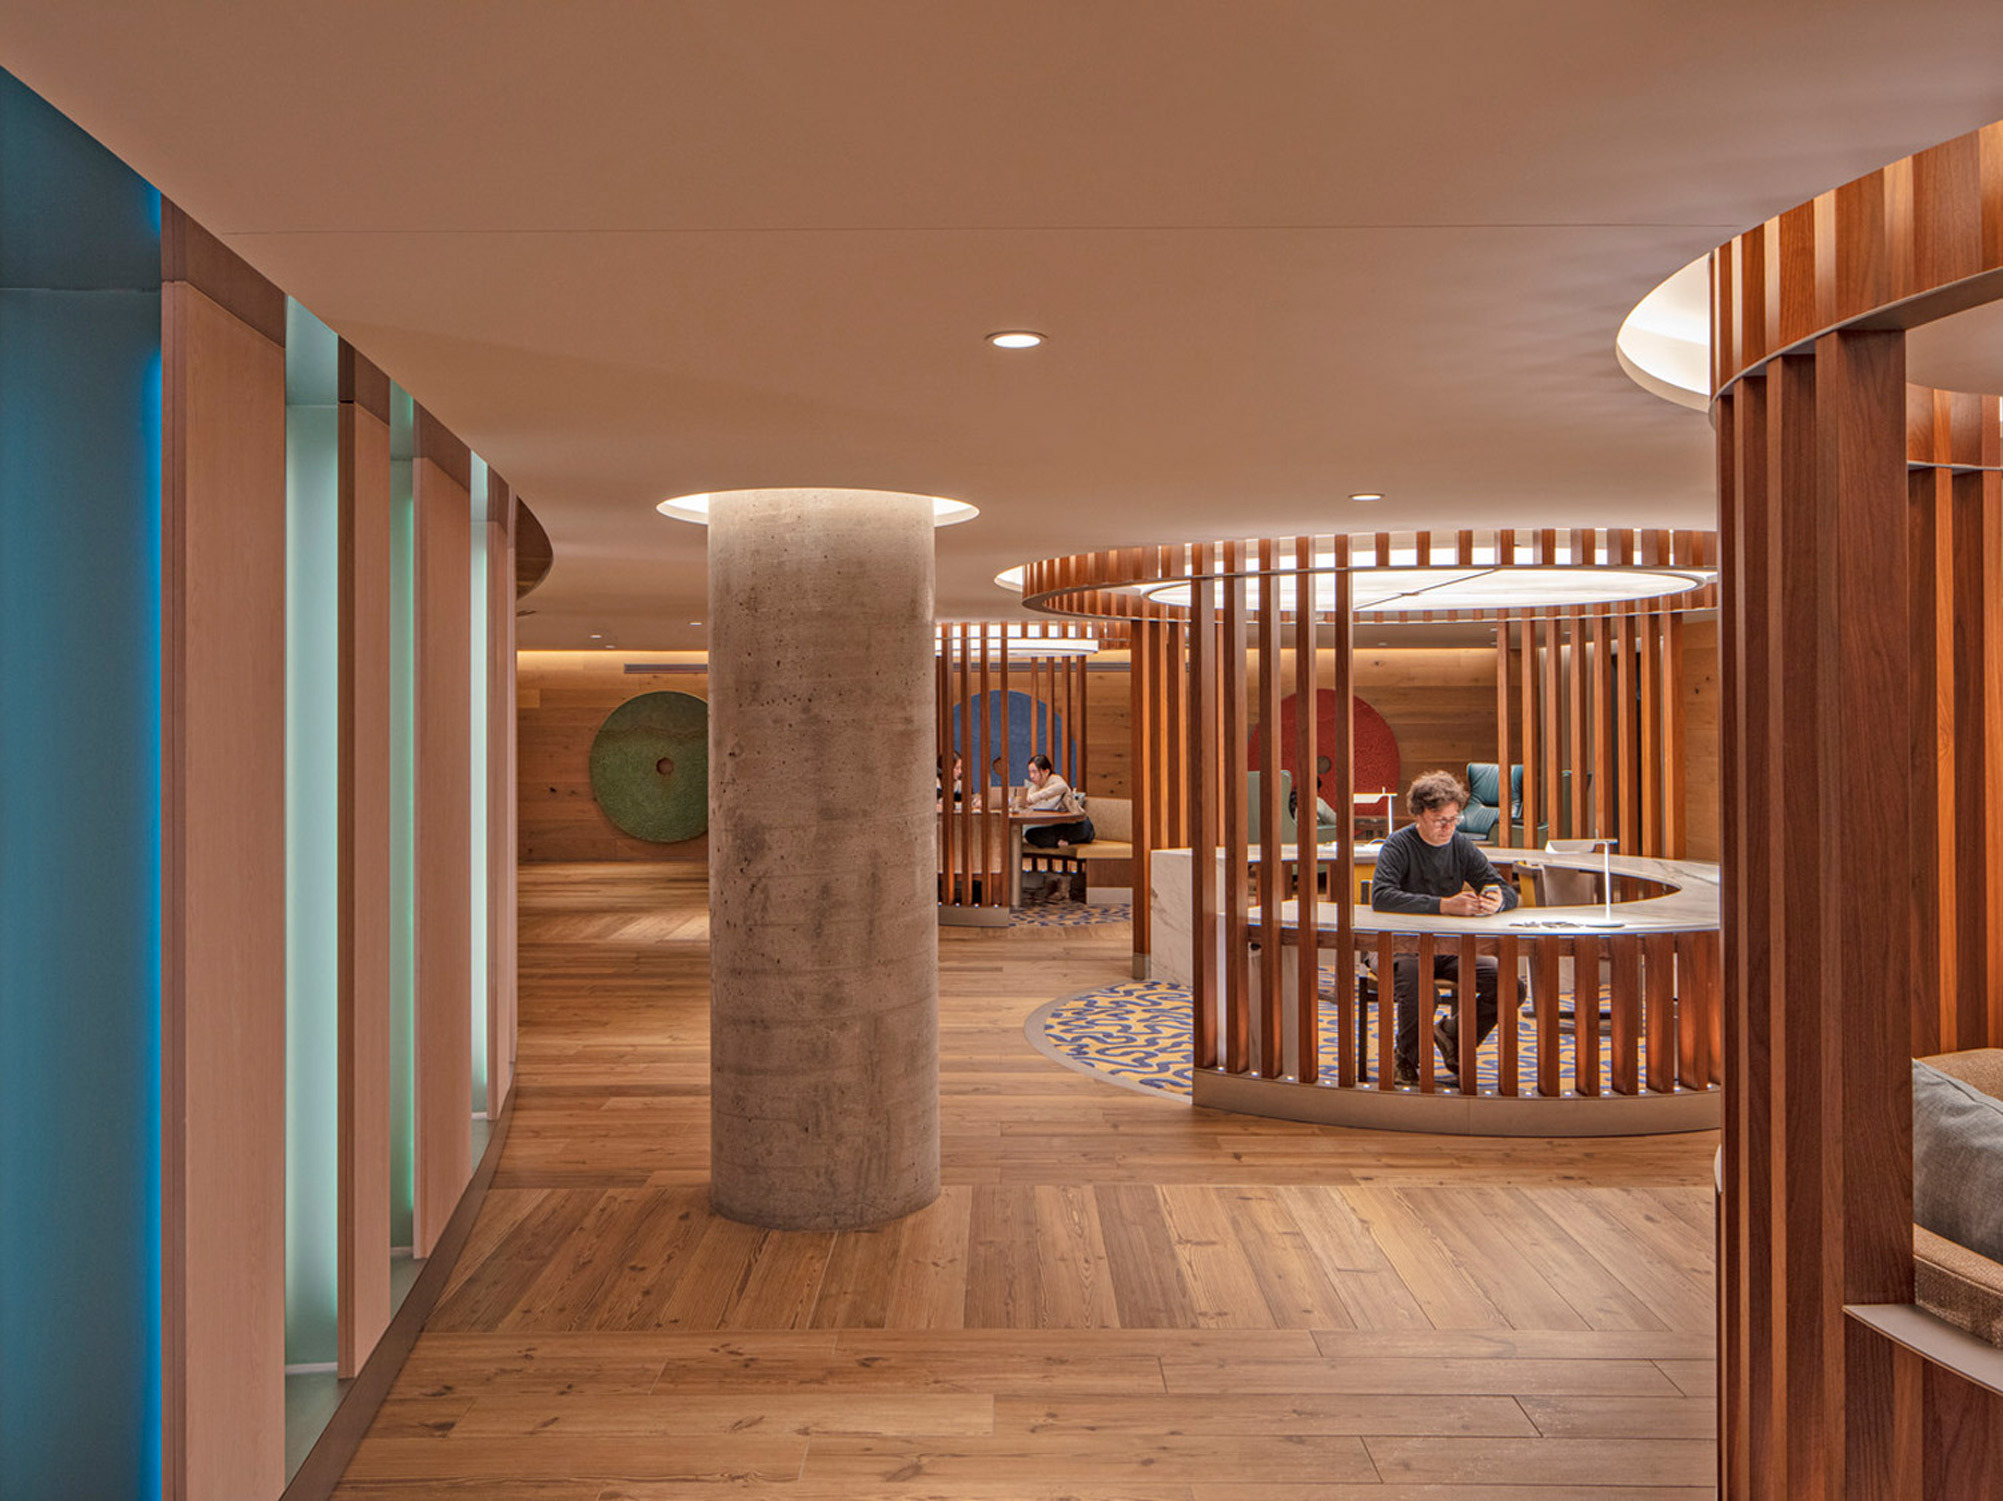 Modern office interior with warm wooden slats creating semi-private workspaces, complemented by subdued lighting and a central exposed concrete column. Geometric carpet patterns and wall art add vibrancy to the space.